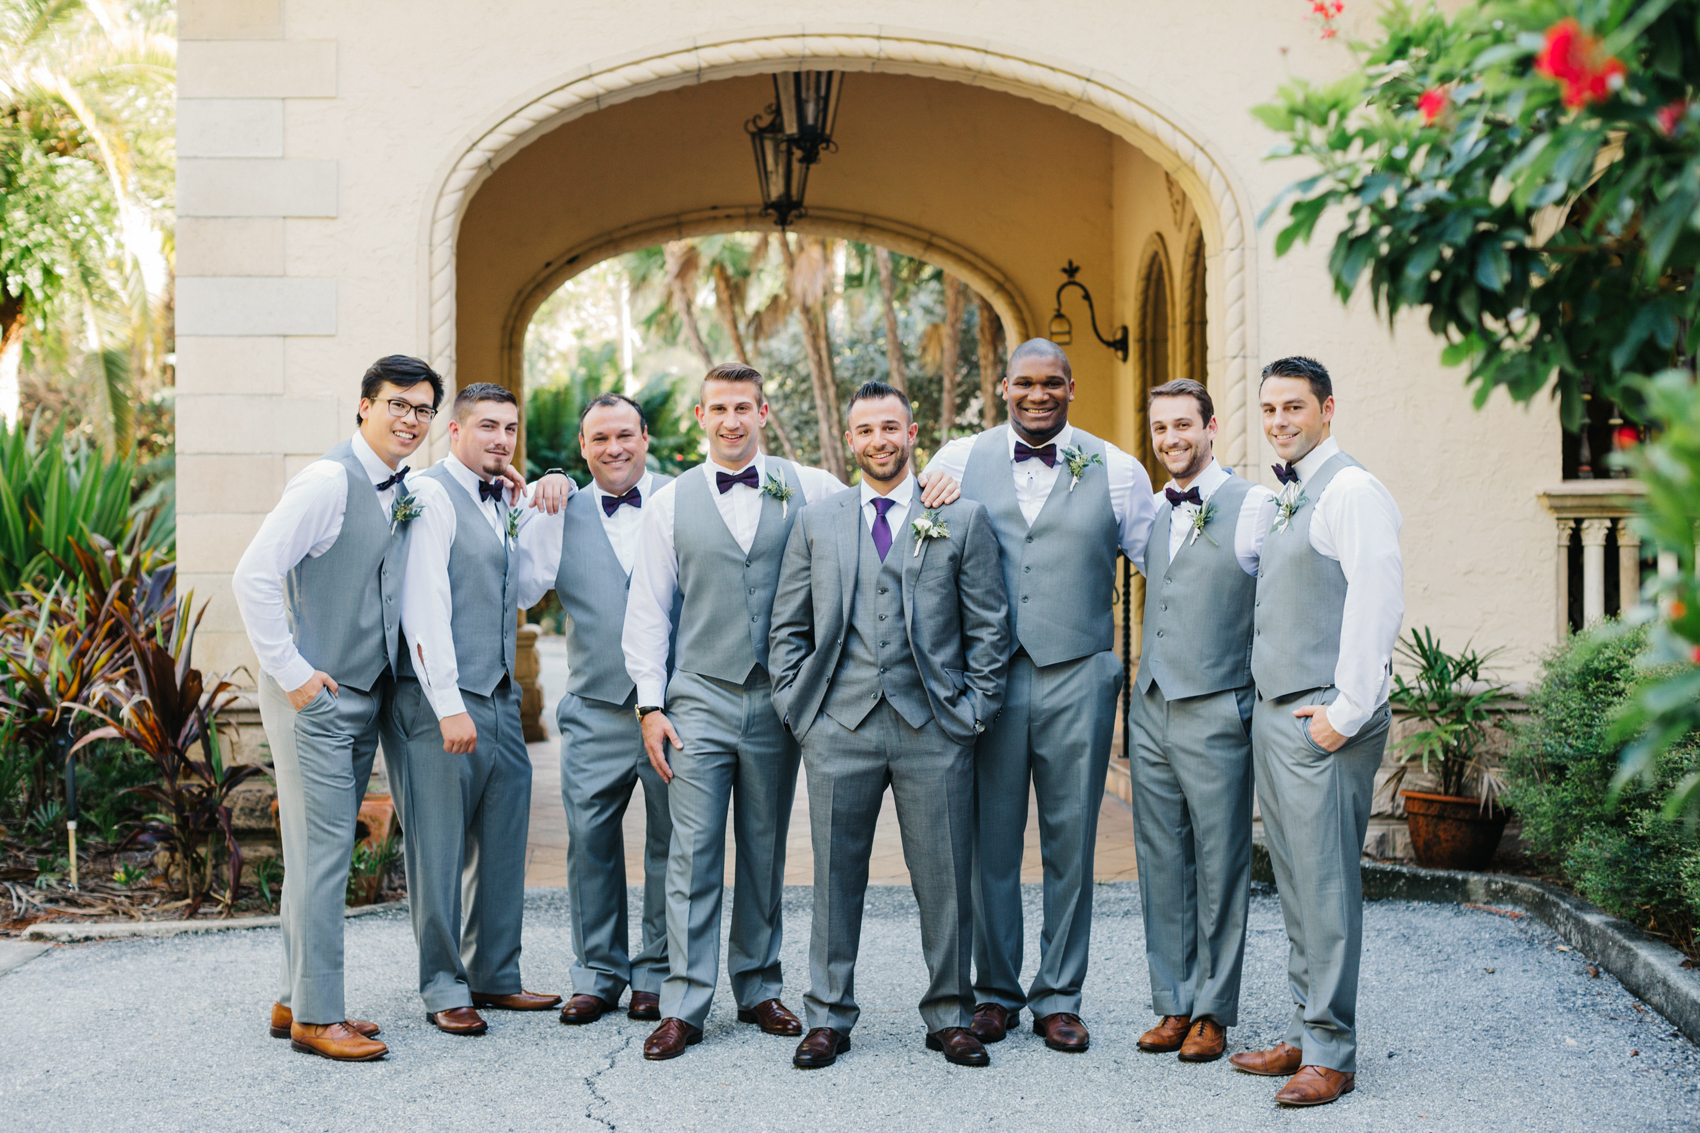 Groom hanging out with his groomsmen before the ceremony wearing grey suits and vests